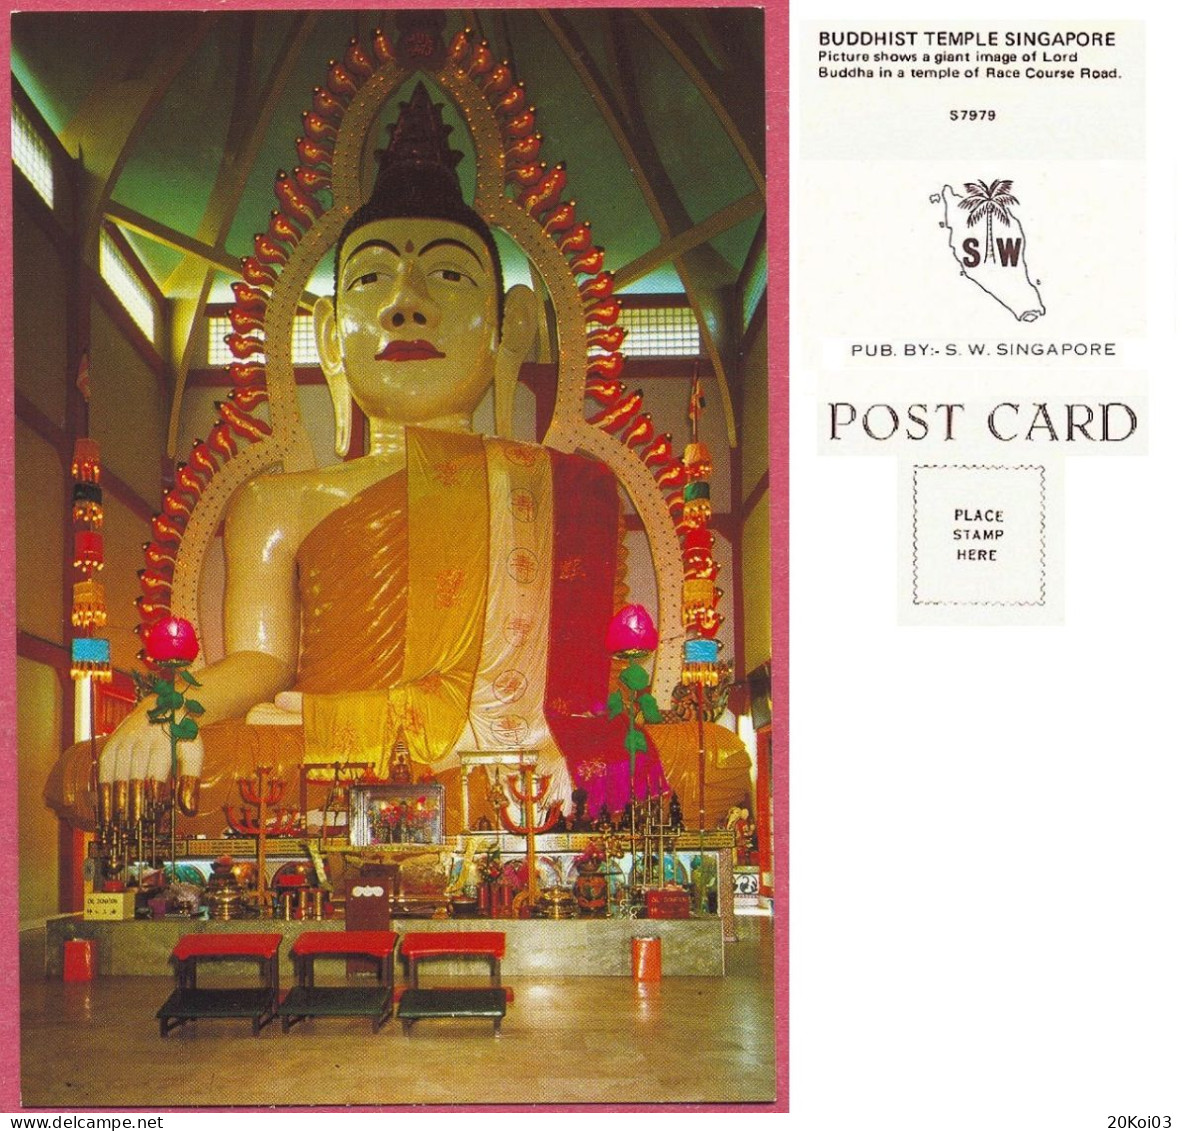 Singapore BUDDHA TEMPLE Picture Giant Lord Of Race Courses Road, +/-1974 Vintage, S7979  PUB. BY. S.W. SINGAPORE_UNC_cpc - Singapore